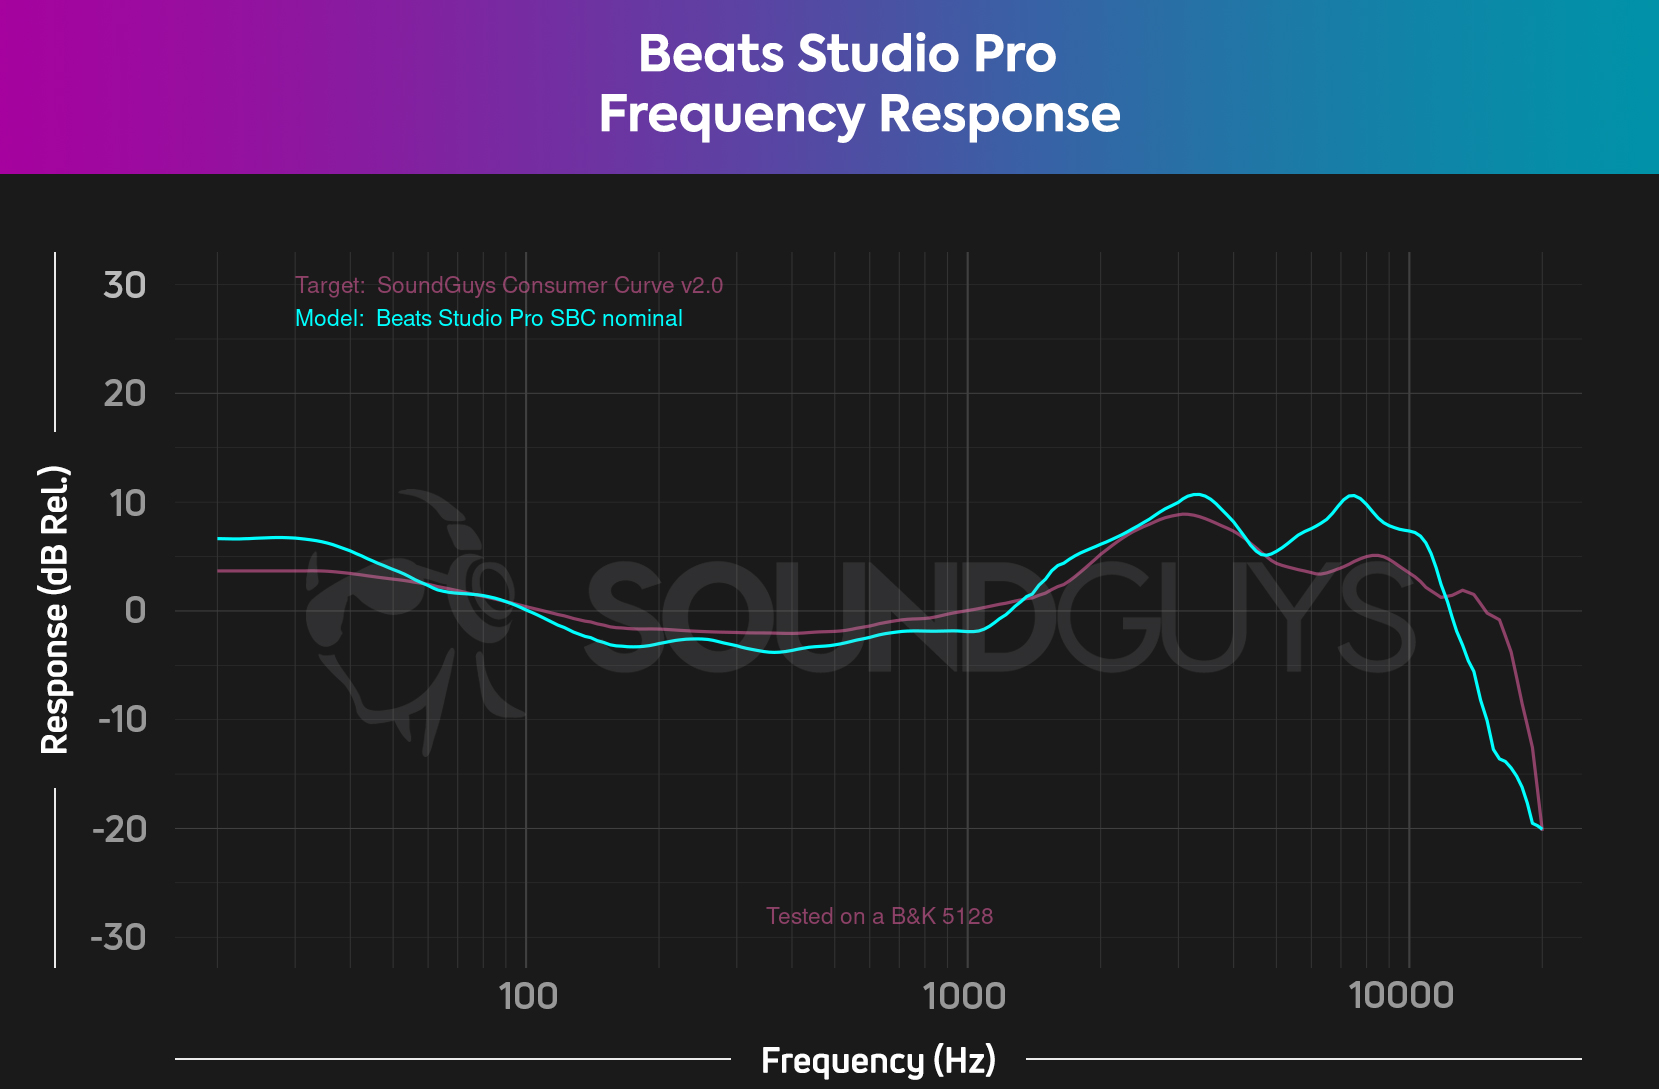 A frequency response chart for the Beats Studio Pro's default setting.